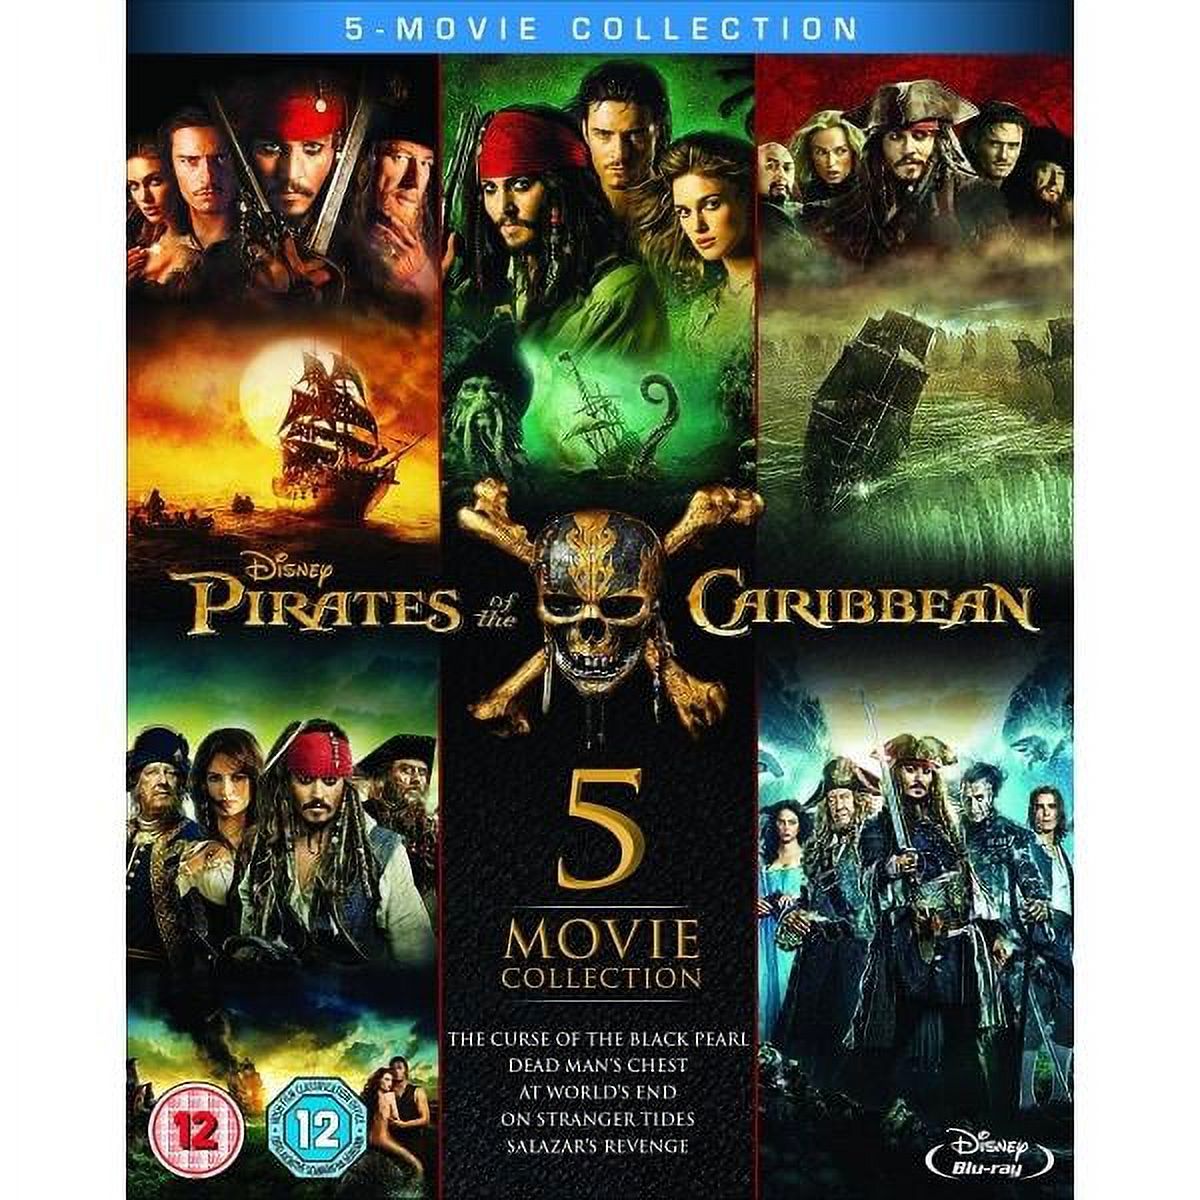 Pirates of the Caribbean - Complete Collection All 5 Movie Collection (Blu-ray) - image 1 of 11